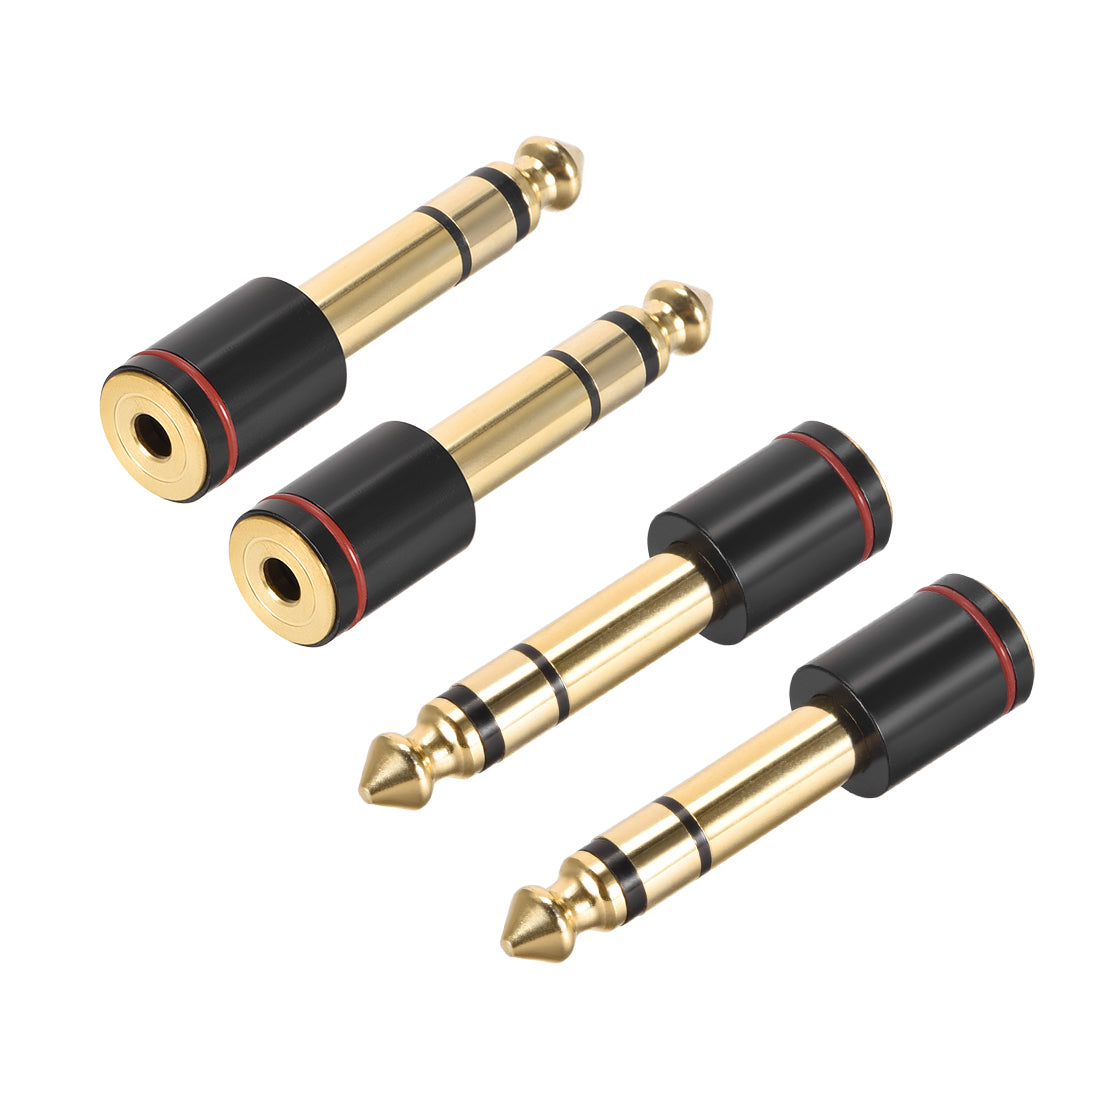 uxcell Uxcell 6.35mm Male to 3.5mm Female Stereo Connector Cable Converter Adapter Gold Plated Copper 4Pcs